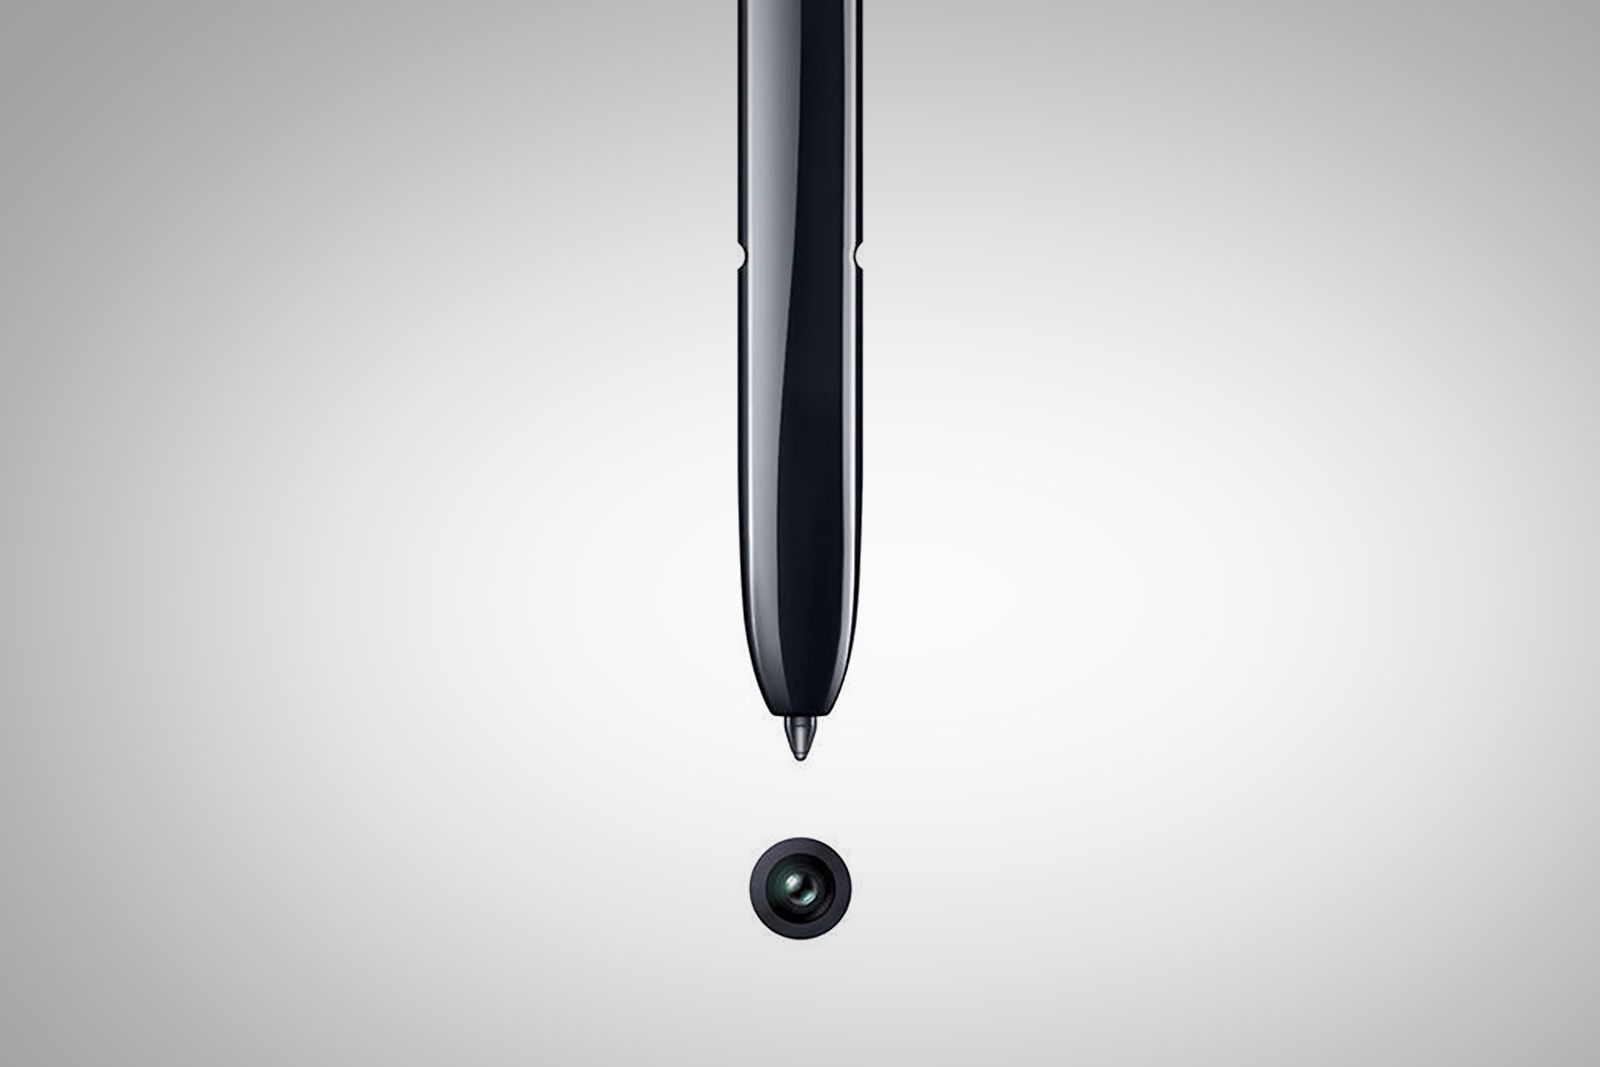 Samsung to announce Galaxy Note 10 and new S Pen on 7 August image 1